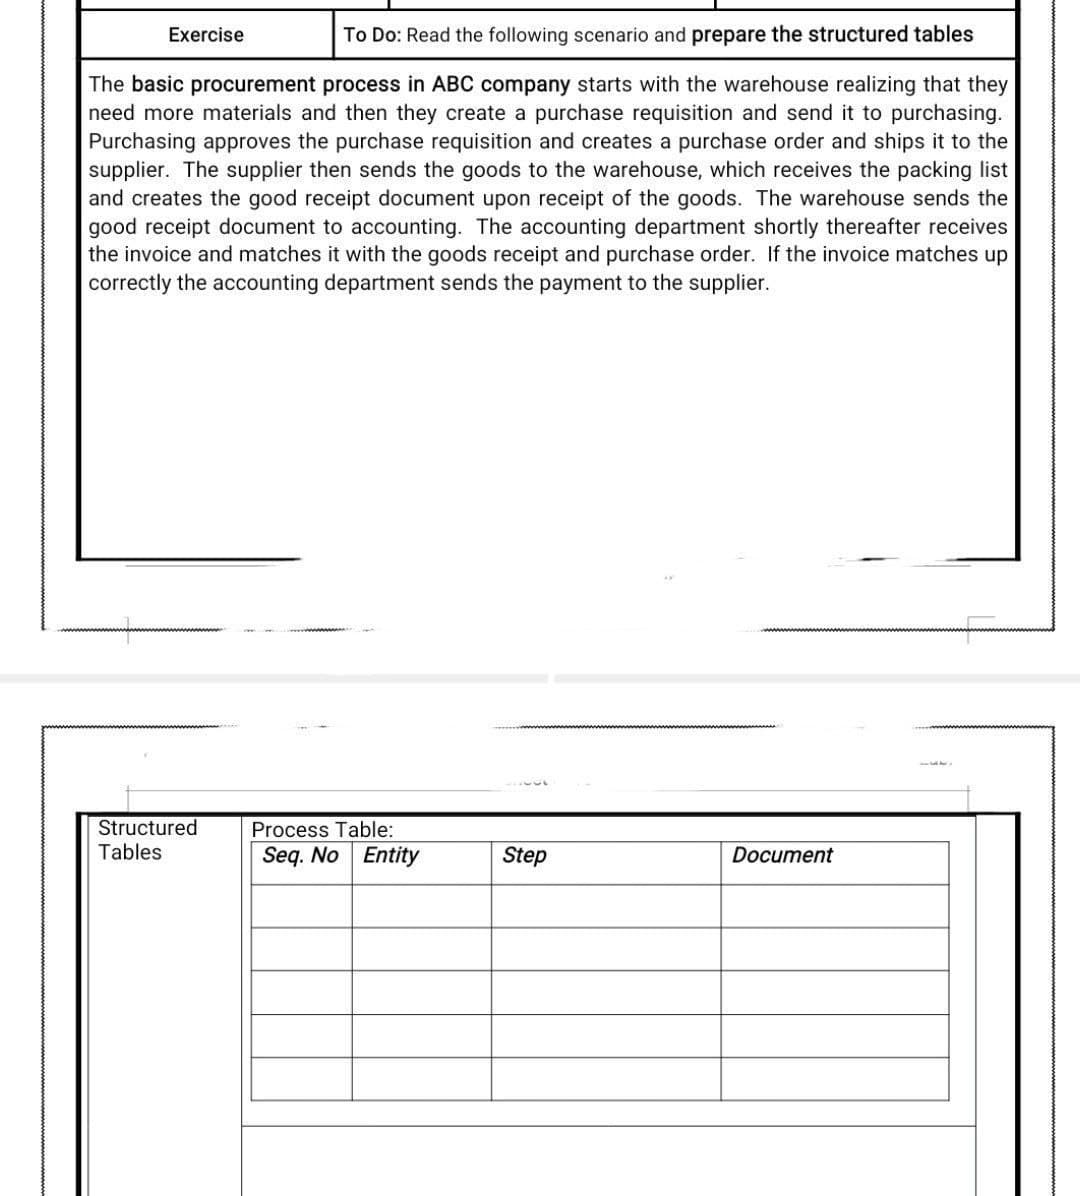 To Do: Read the following scenario and prepare the structured tables
The basic procurement process in ABC company starts with the warehouse realizing that they
need more materials and then they create a purchase requisition and send it to purchasing.
Purchasing approves the purchase requisition and creates a purchase order and ships it to the
supplier. The supplier then sends the goods to the warehouse, which receives the packing list
and creates the good receipt document upon receipt of the goods. The warehouse sends the
good receipt document to accounting. The accounting department shortly thereafter receives
the invoice and matches it with the goods receipt and purchase order. If the invoice matches up
correctly the accounting department sends the payment to the supplier.
Exercise
Structured
Tables
Process Table:
Seq. No Entity
Step
Document